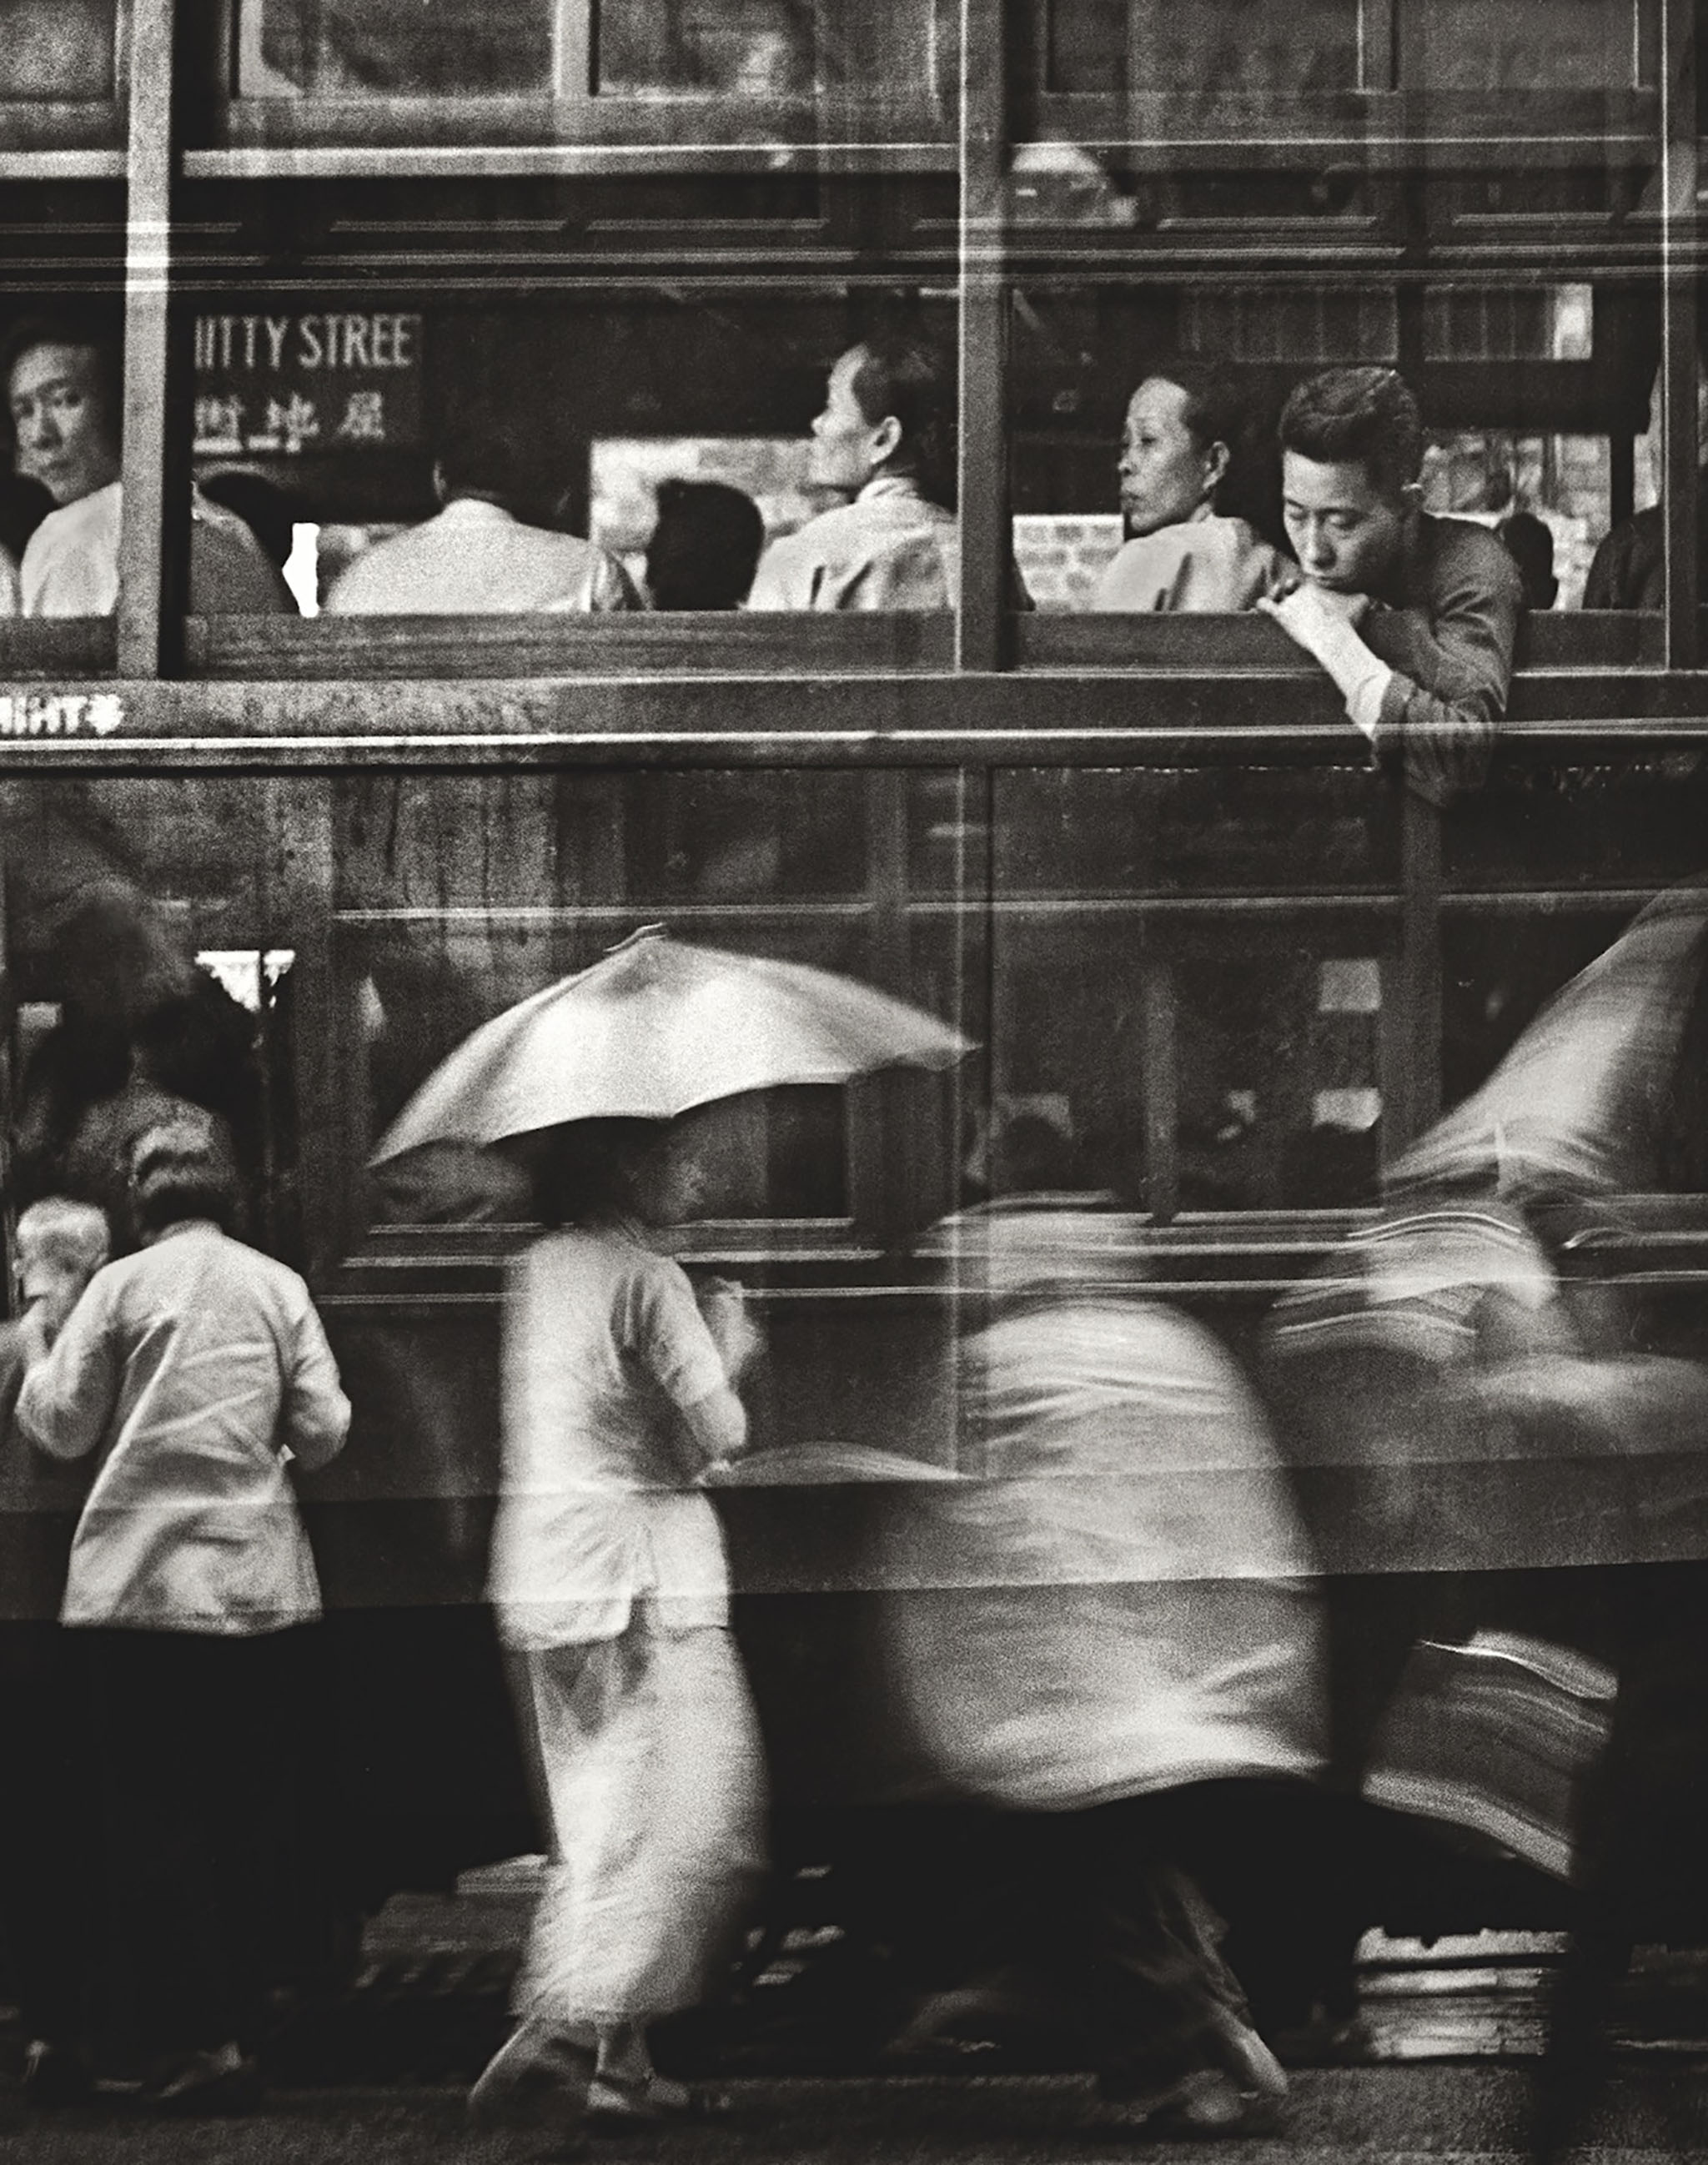 Fan-Ho-Whitty-Street-Diary屈地街日記-Hong-Kong-1950s-and-60s-courtesy-of-Blue-Lotus-Gallery.jpg